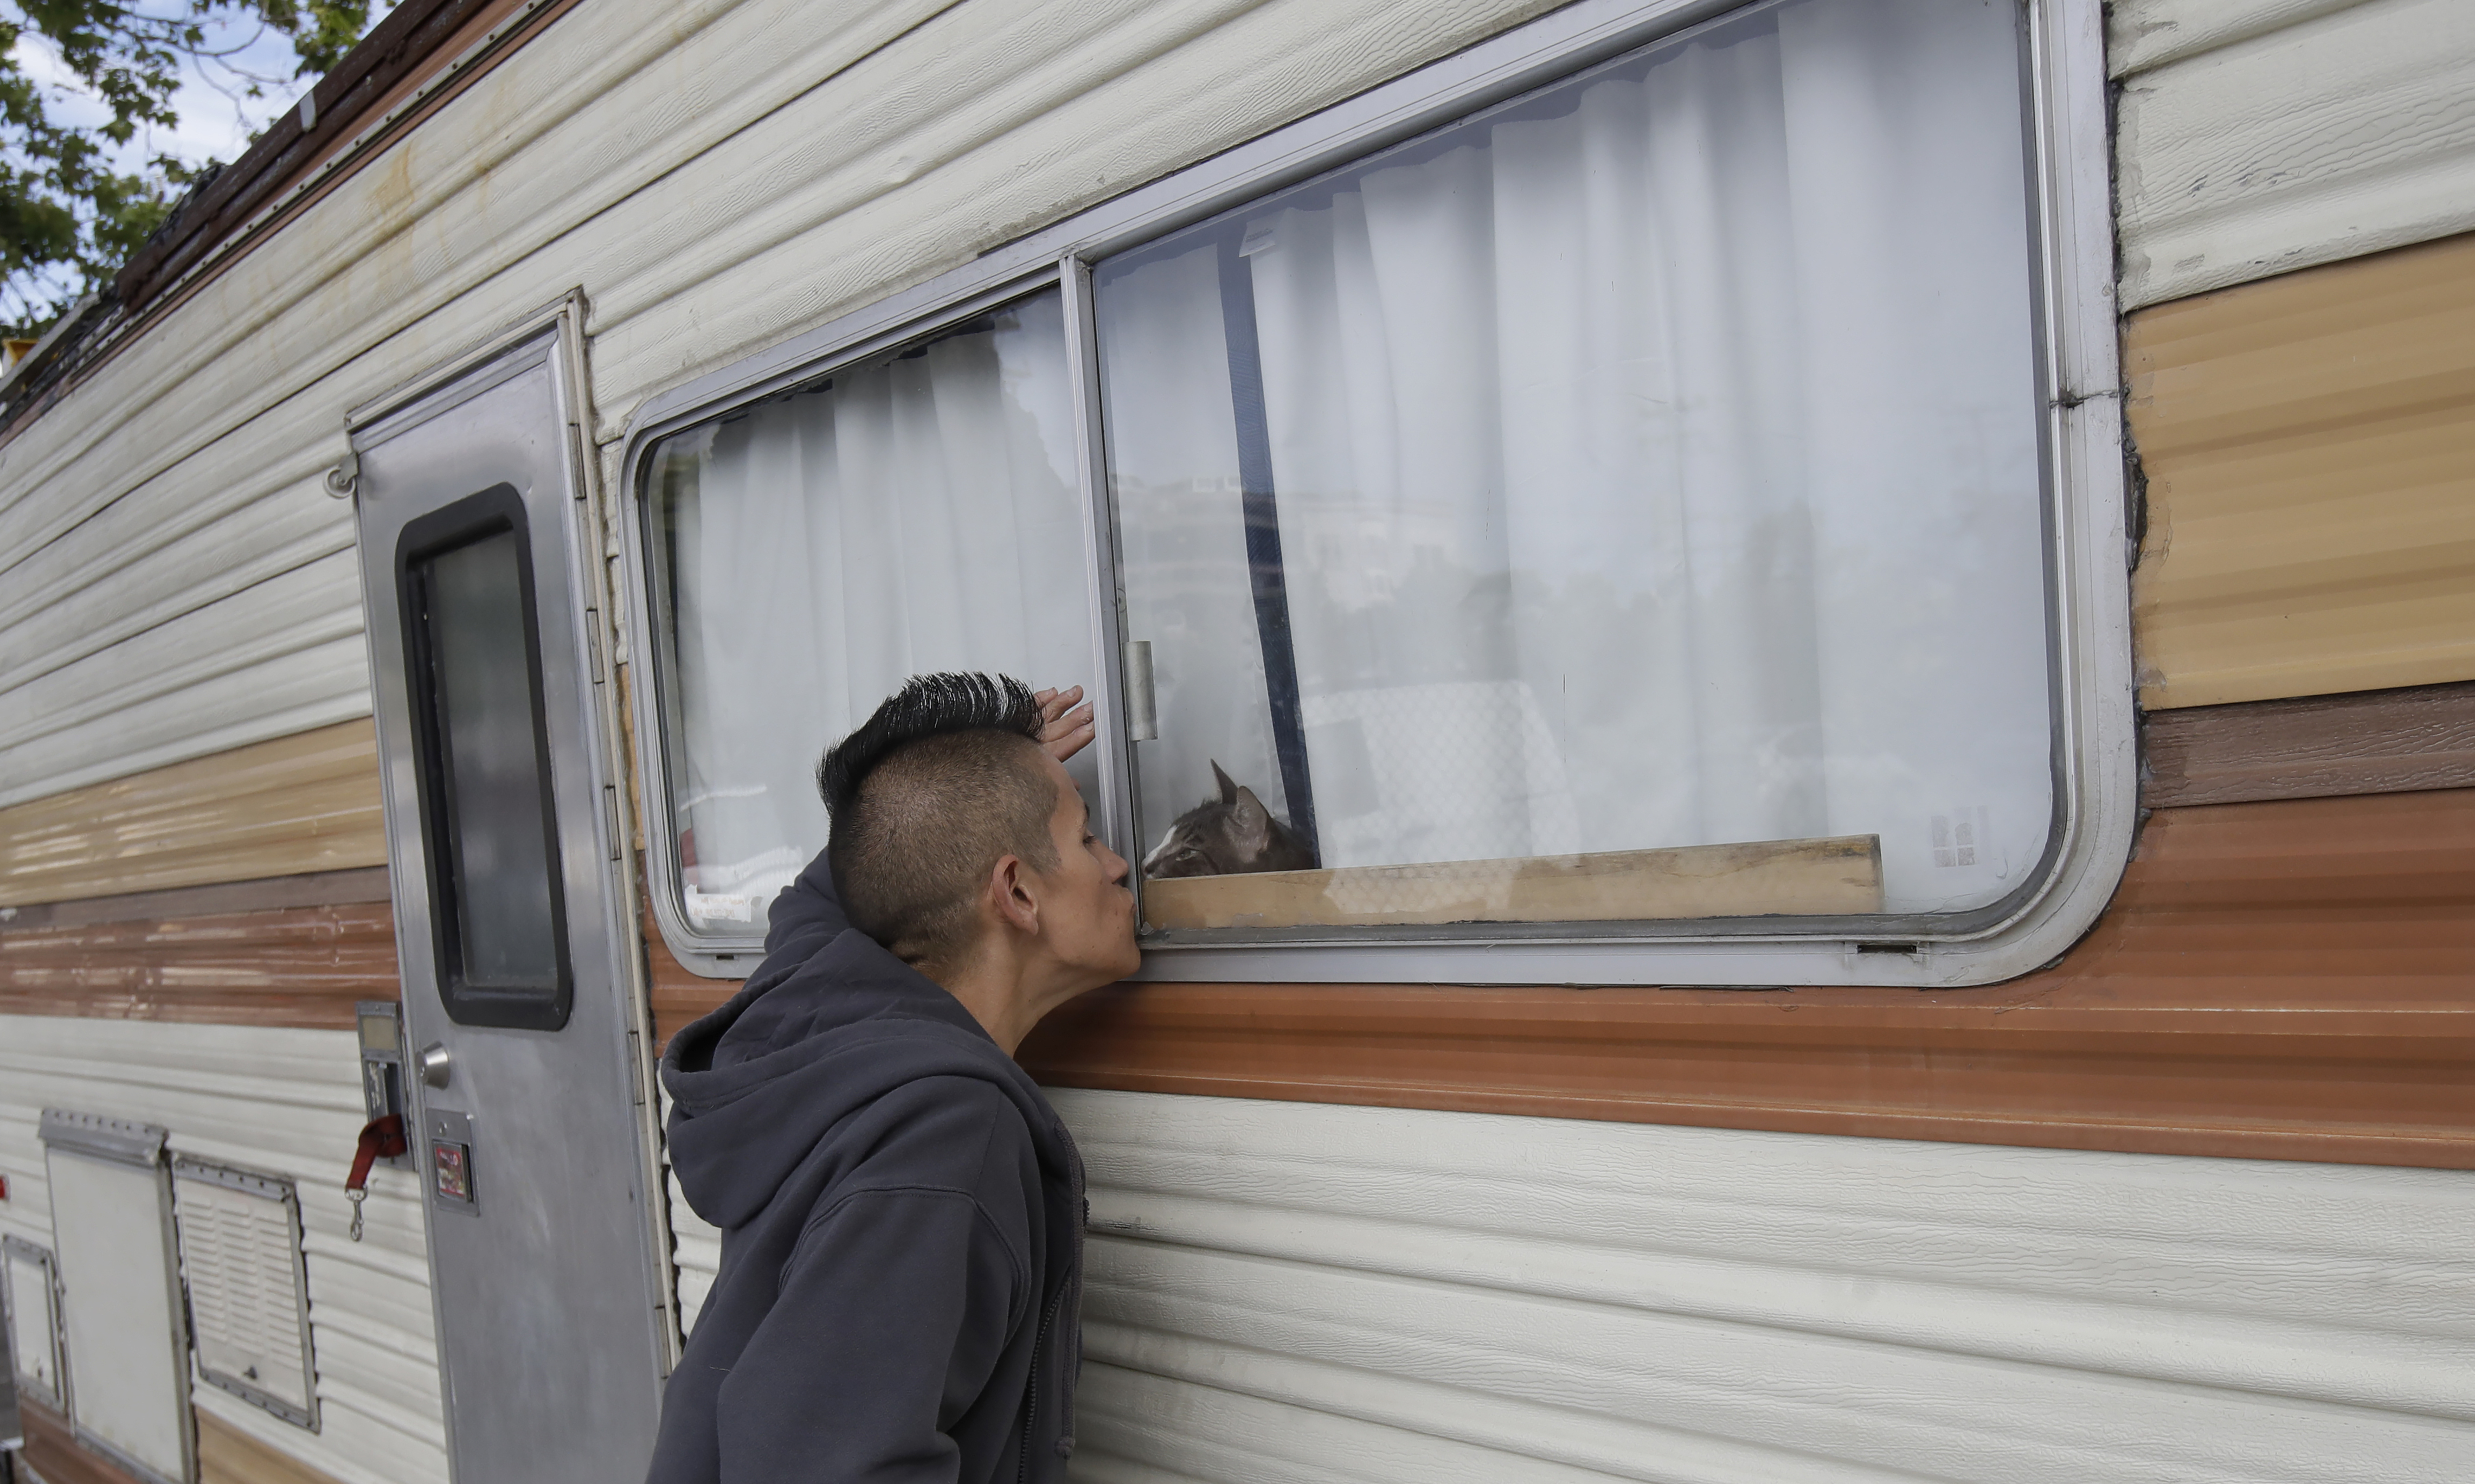 Shanna Couper Orona kisses her cat Maison through a window of her RV parked along a street in San Francisco.